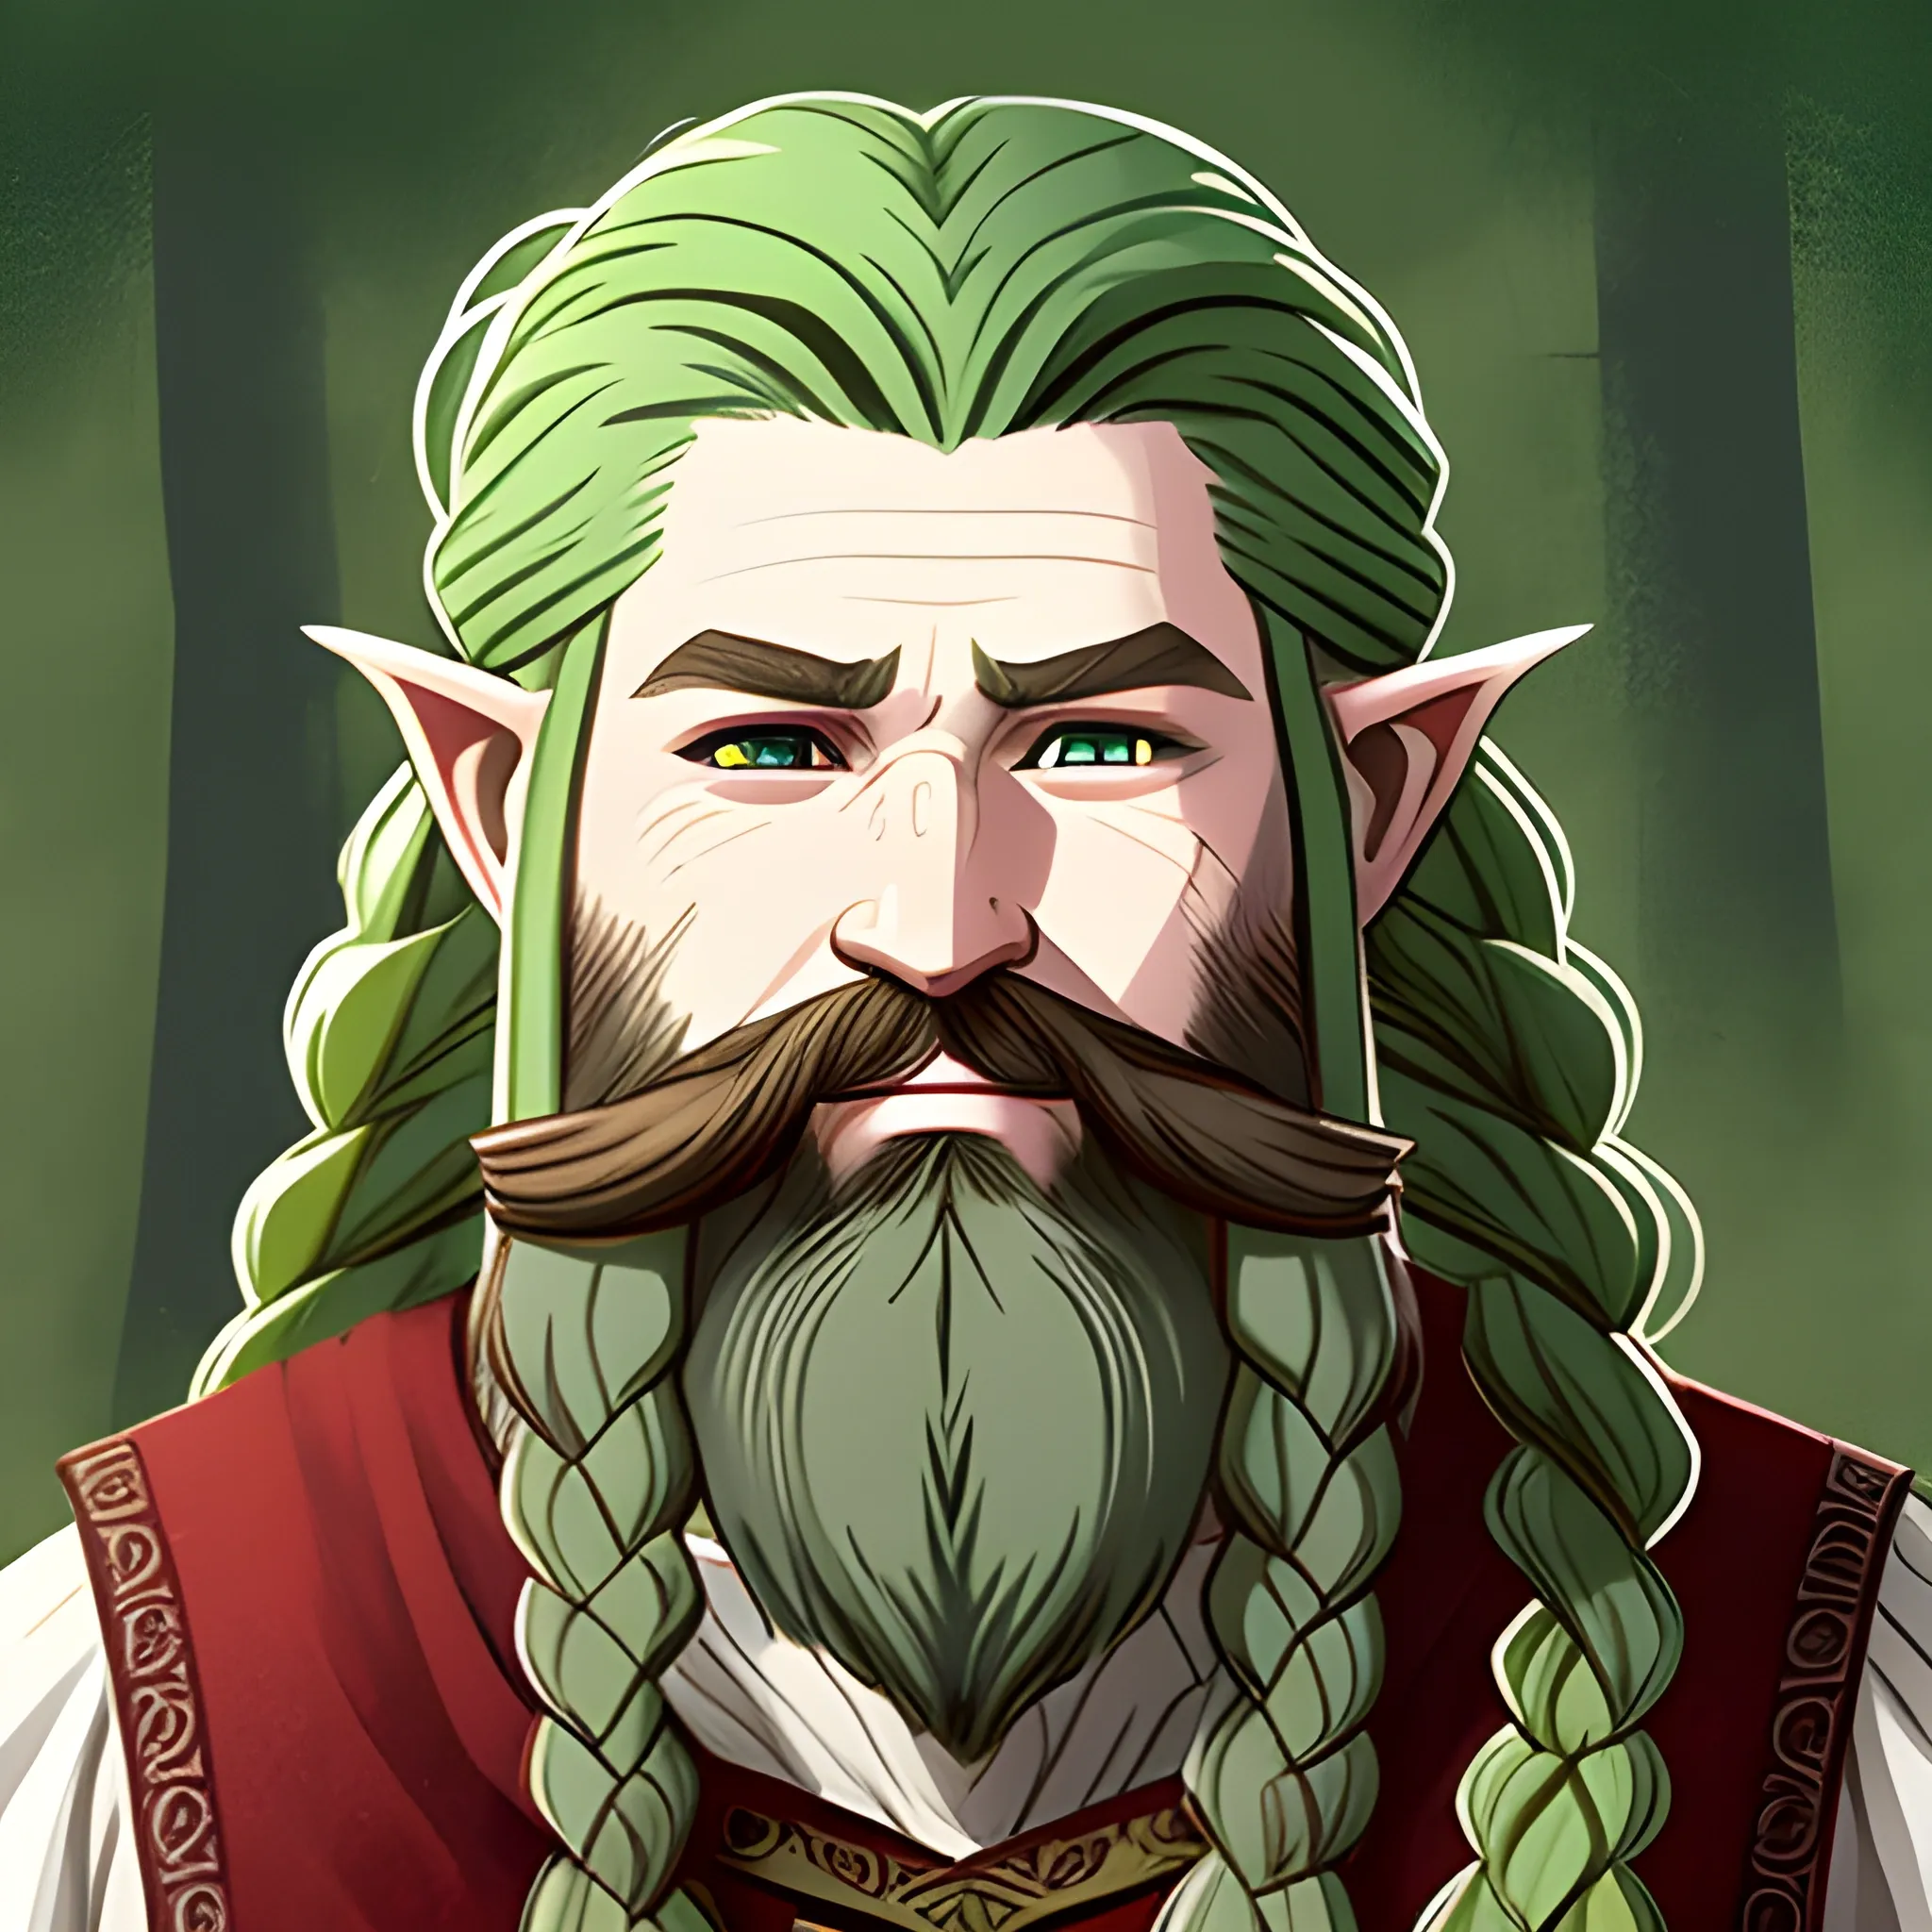 Firbolg with sage green eyes, long forest green hair put in a braid, with a beard and a red noise wearing noble clothing